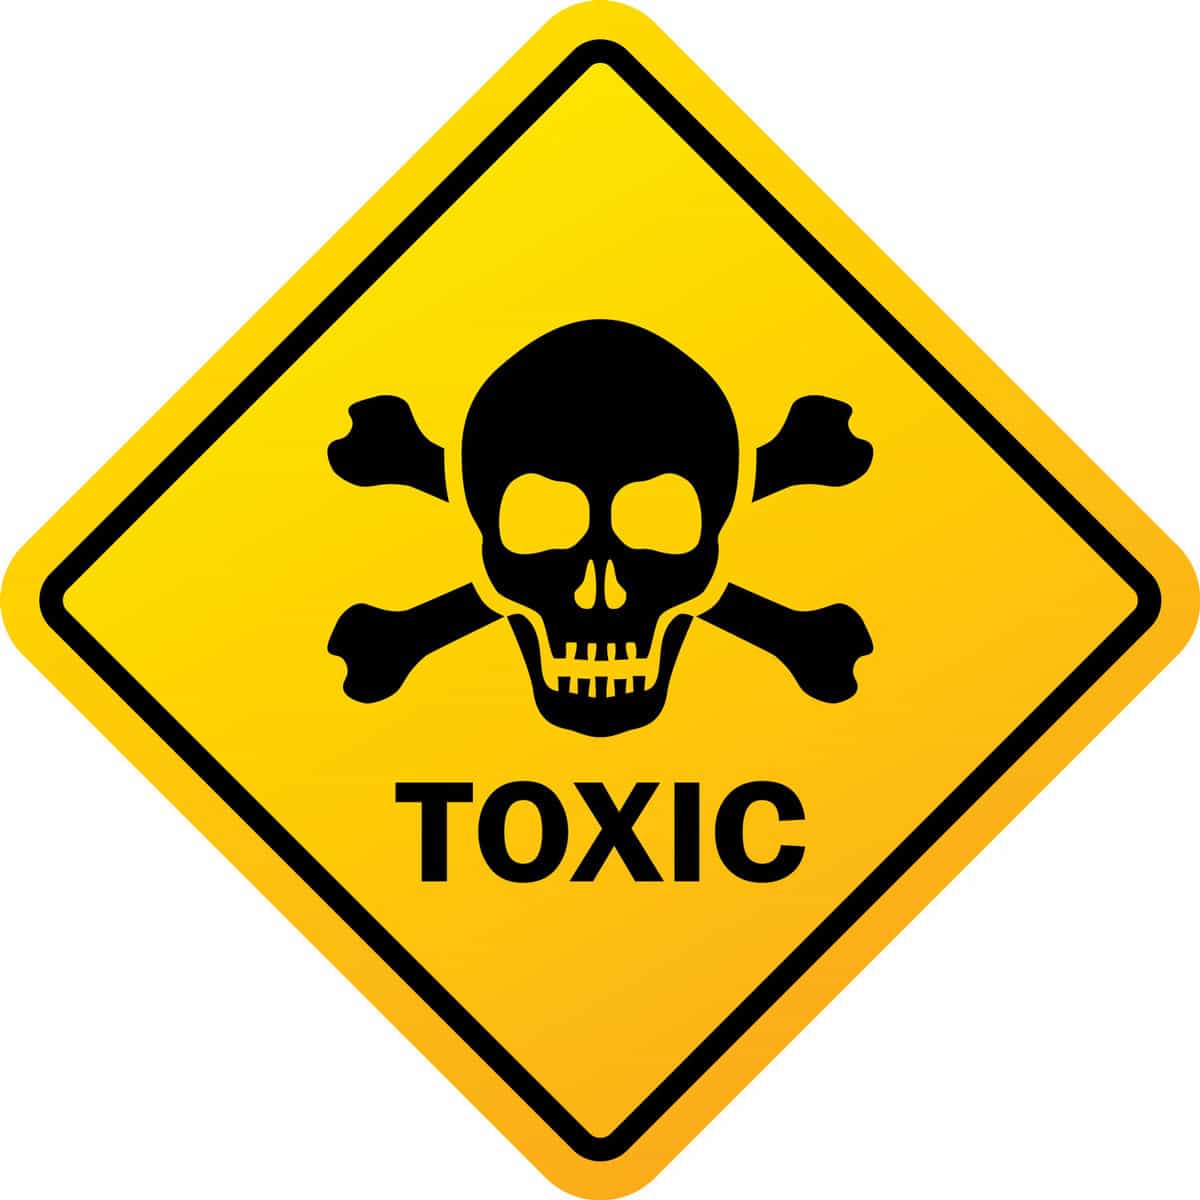 Toxic safety sign vector illustration isolated on white background 